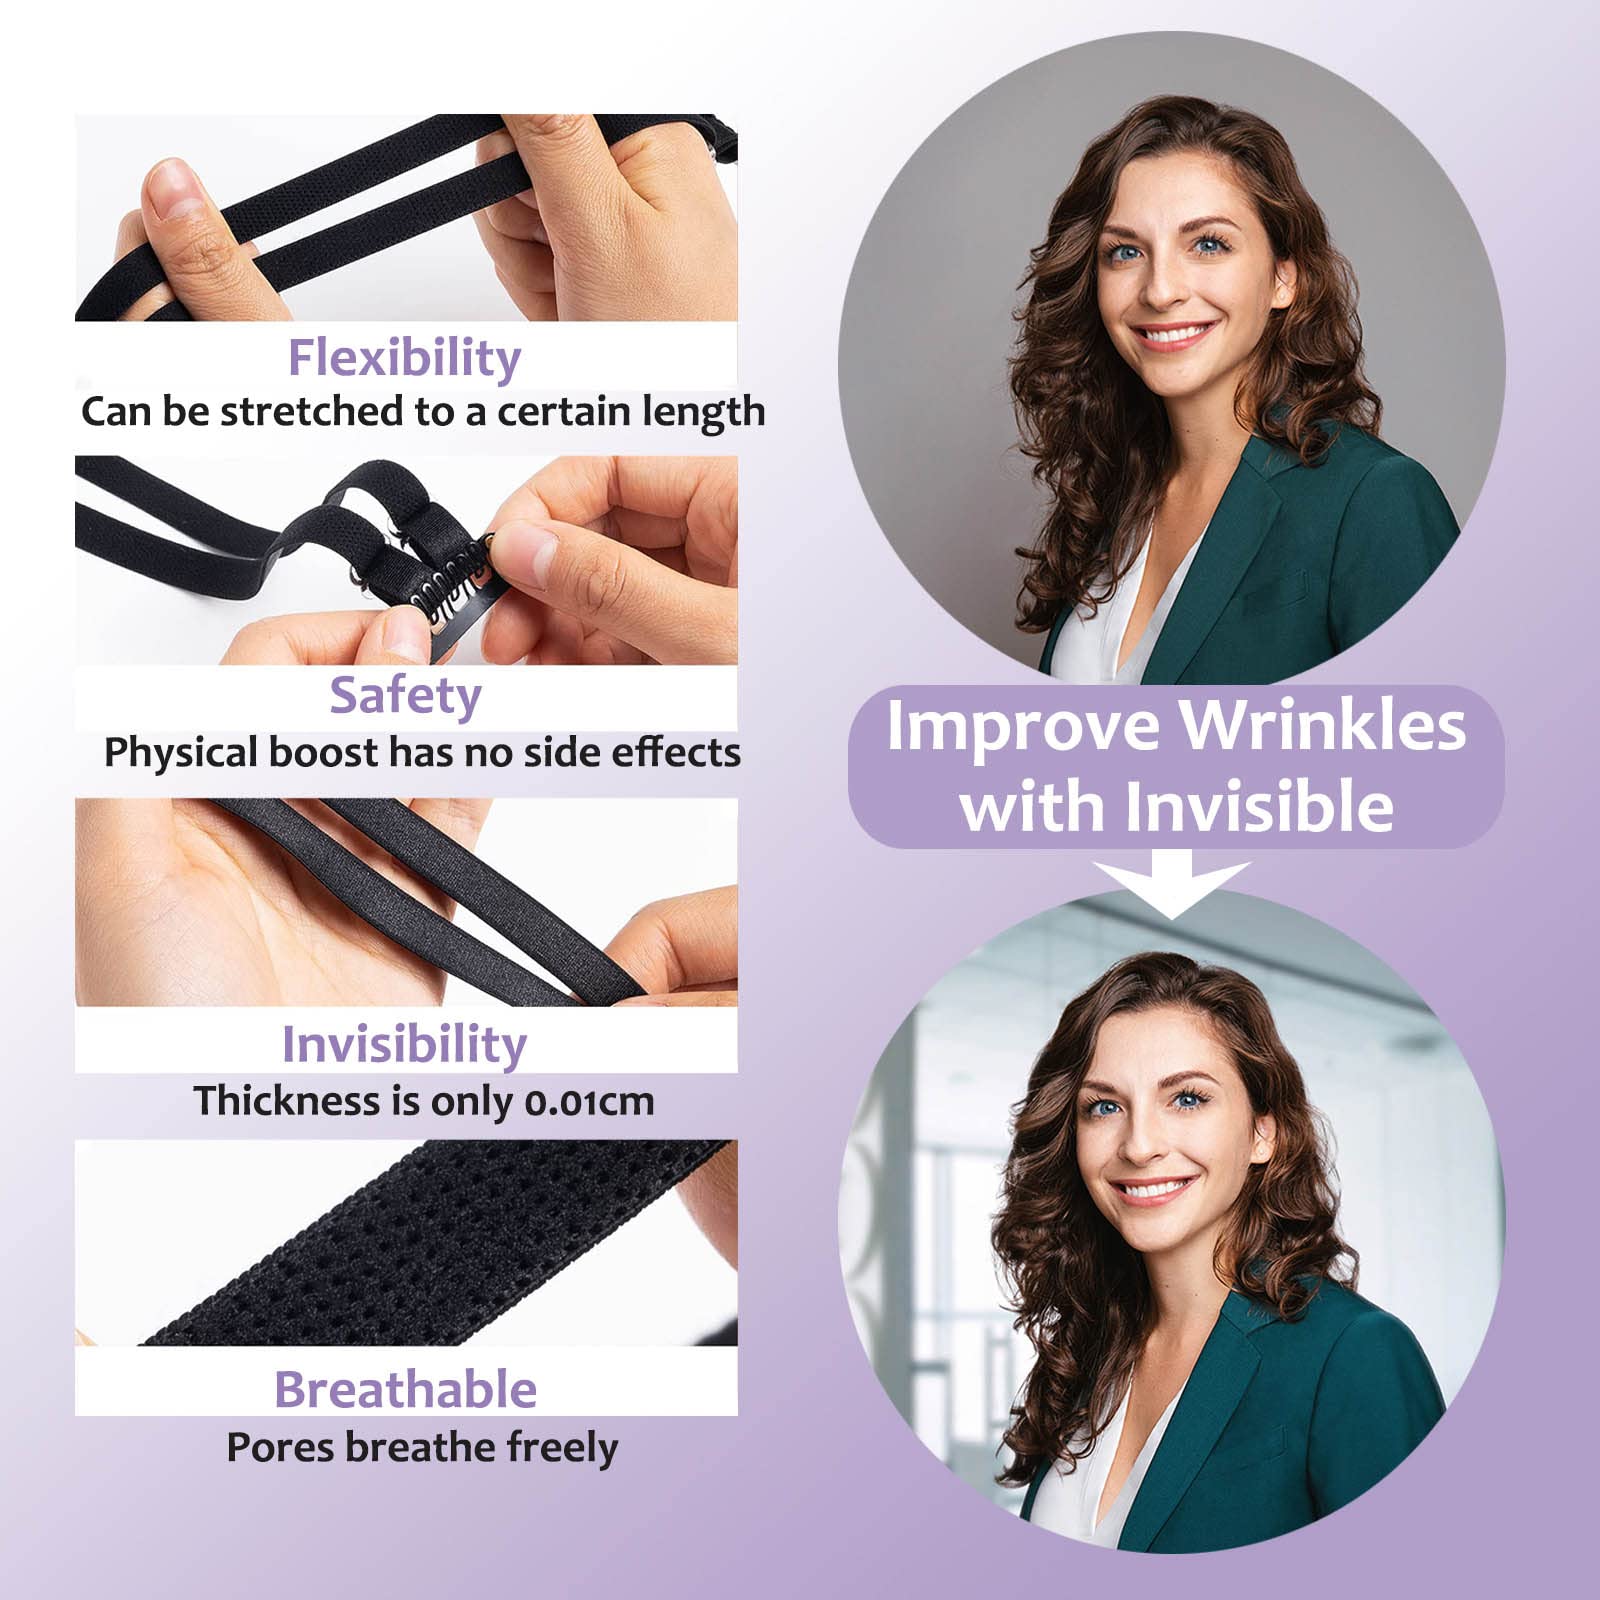 UbodyOasis 3-in-1 Face Lift Tapes and Bands Set - Facelift Tape for Face Invisible with Bands for Instant Lifting Face Tightening and Smoothing - Secret Face Tape for Wrinkles - Black